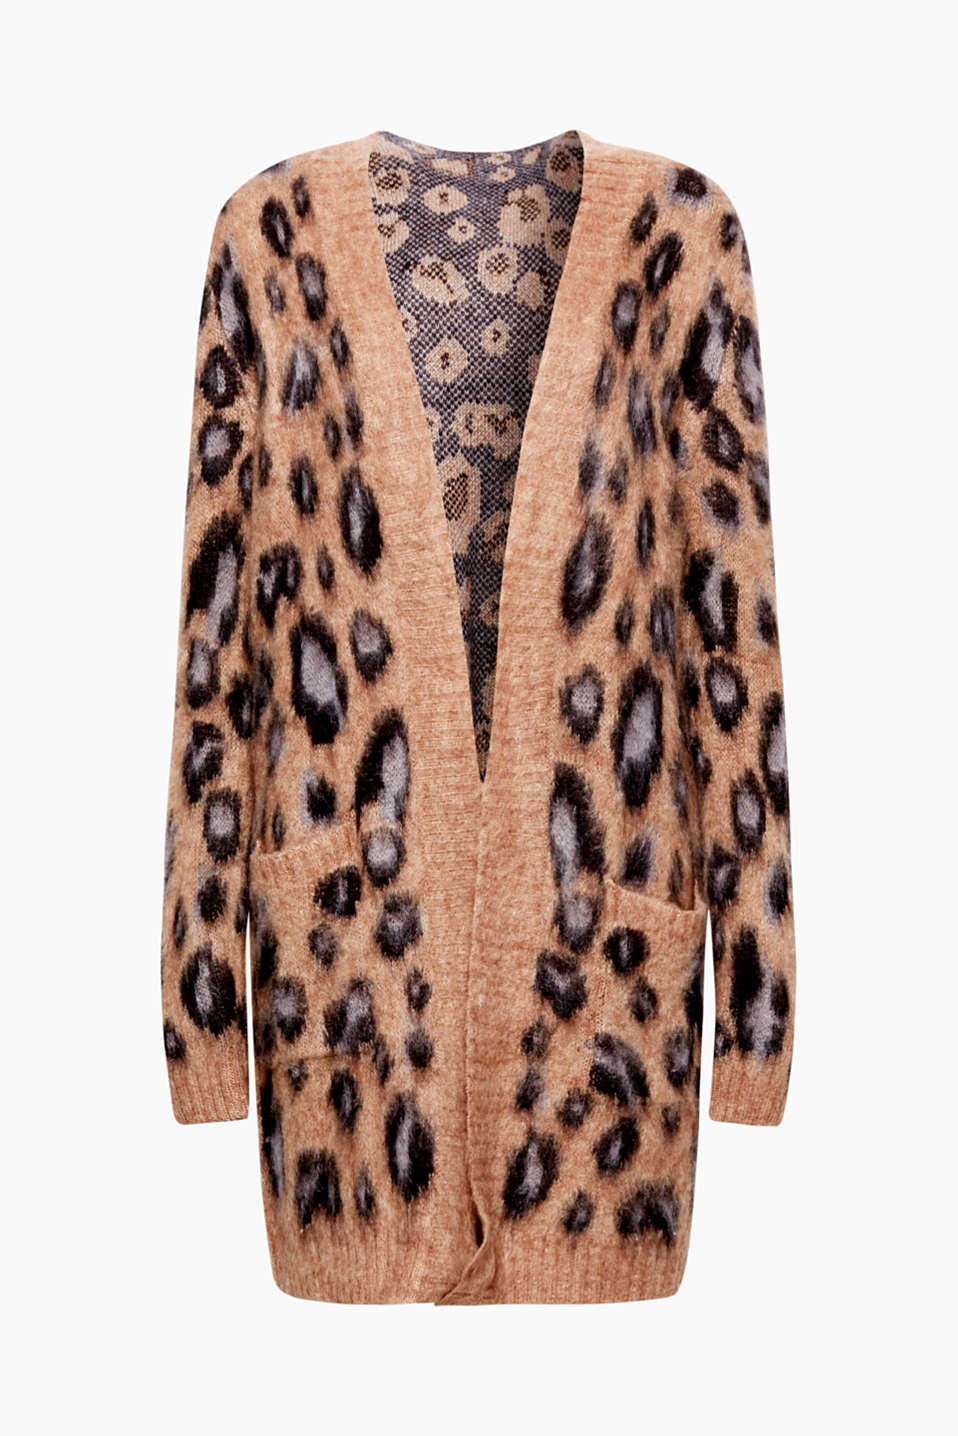 edc - Lightweight leopard cardigan, mohair at our Online Shop